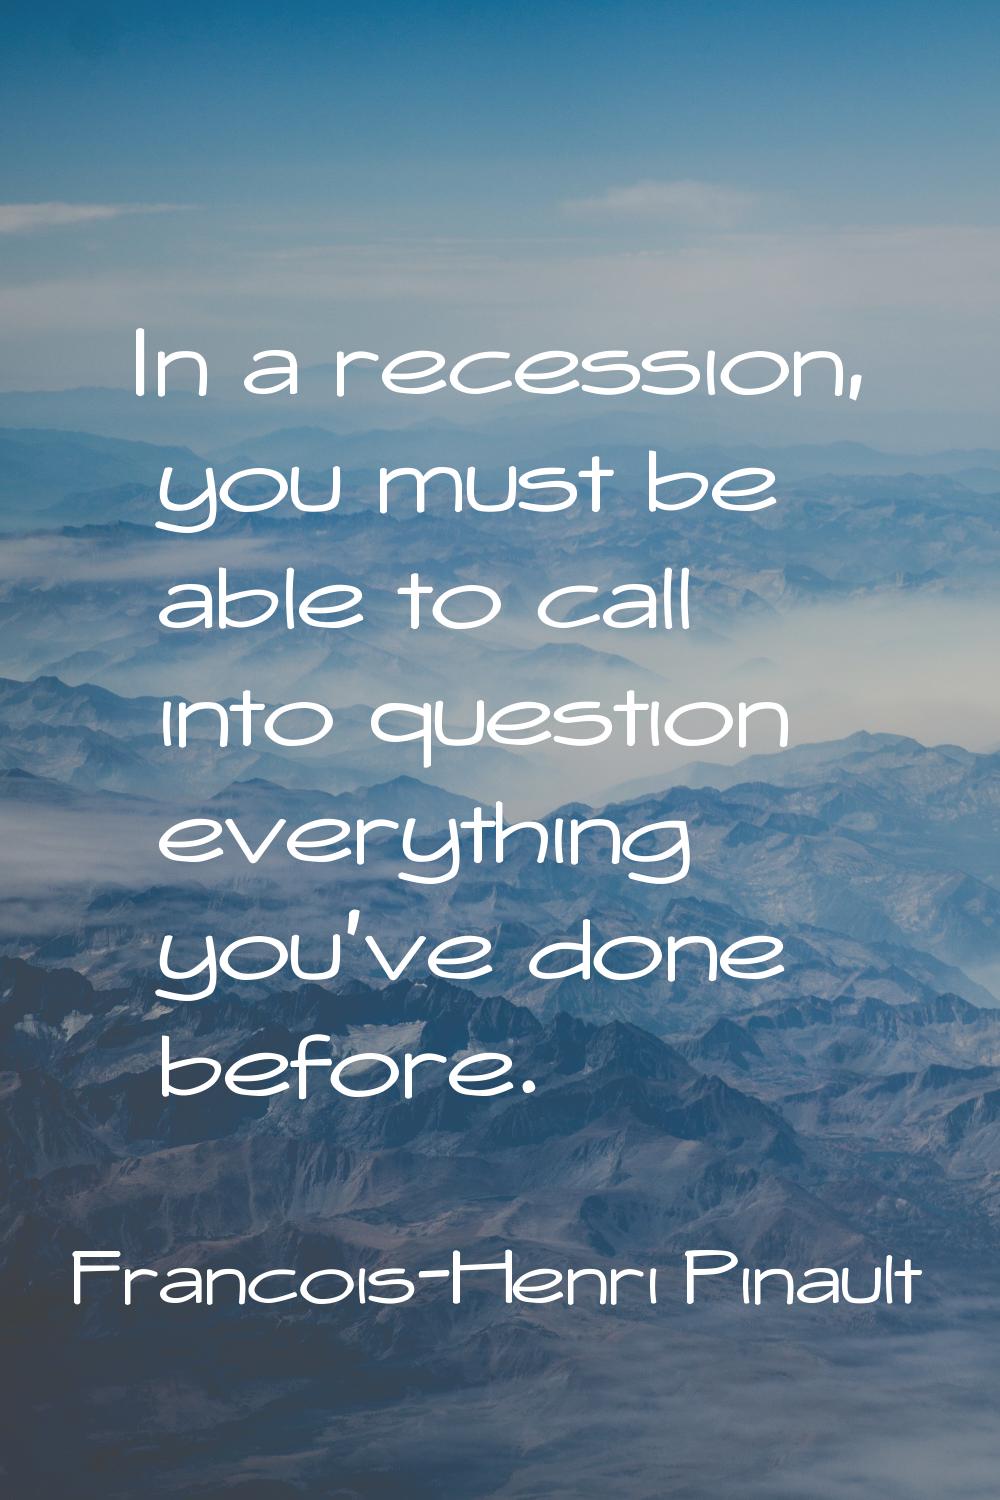 In a recession, you must be able to call into question everything you've done before.